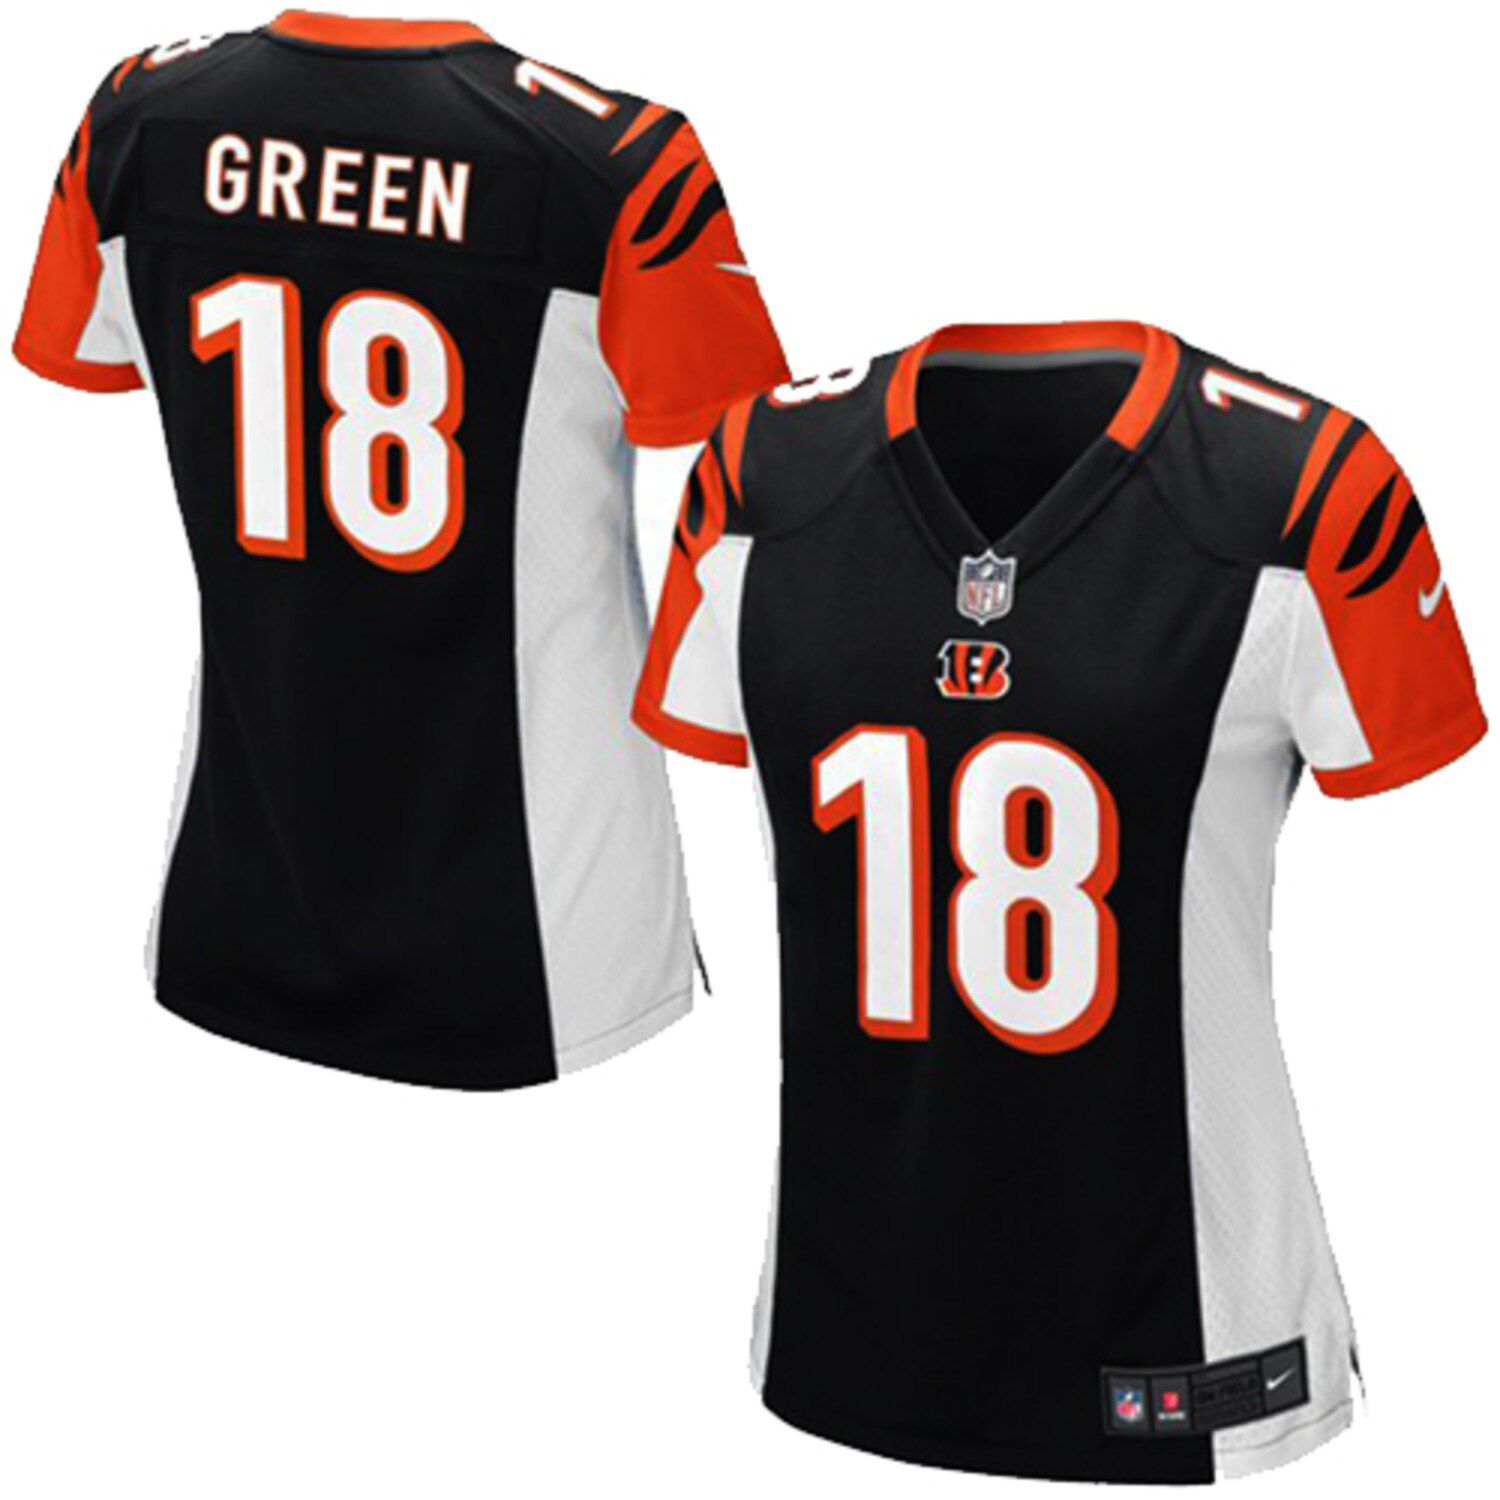 aj green jersey youth large